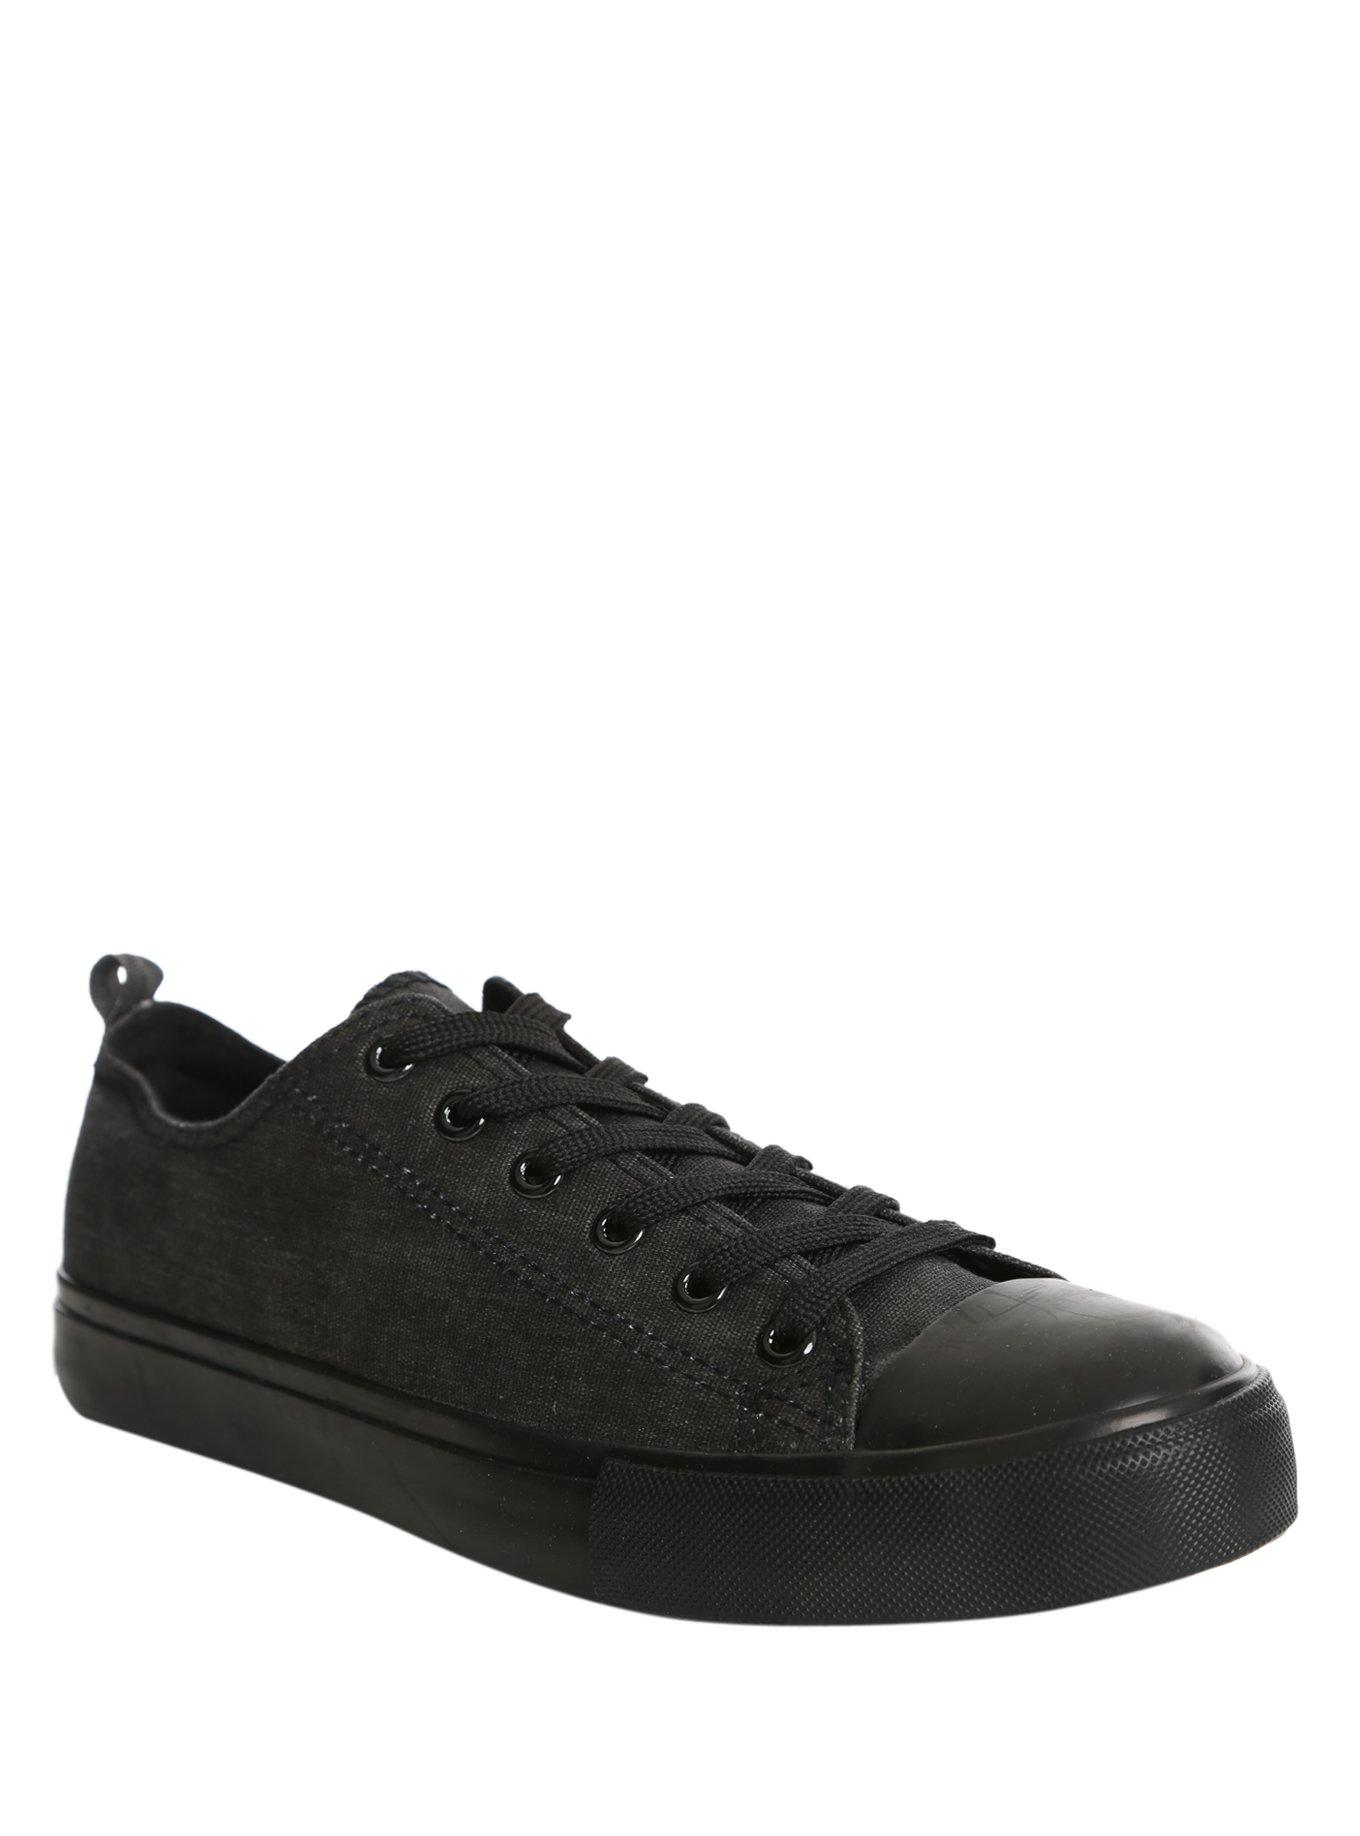 Grey Lace-Up Sneakers, BLACK, hi-res